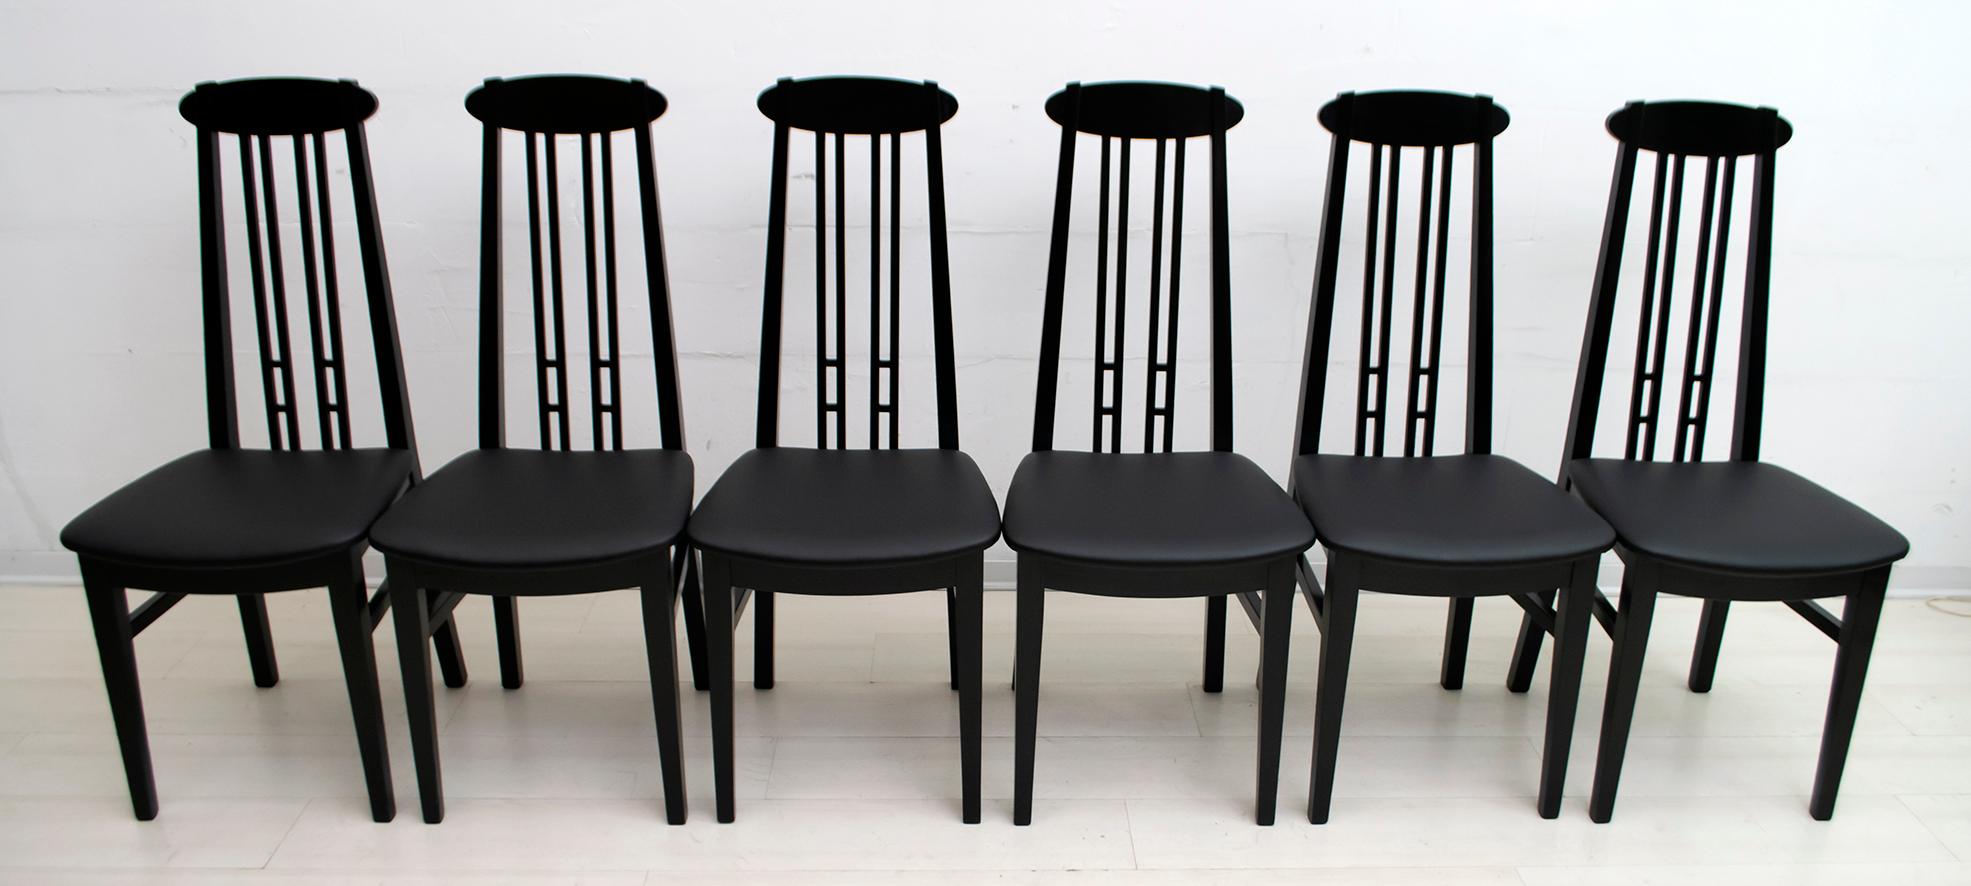 Italian After Charles Rennie Mackintosh 6 Black Lacquered High-Backed Chairs, 1979